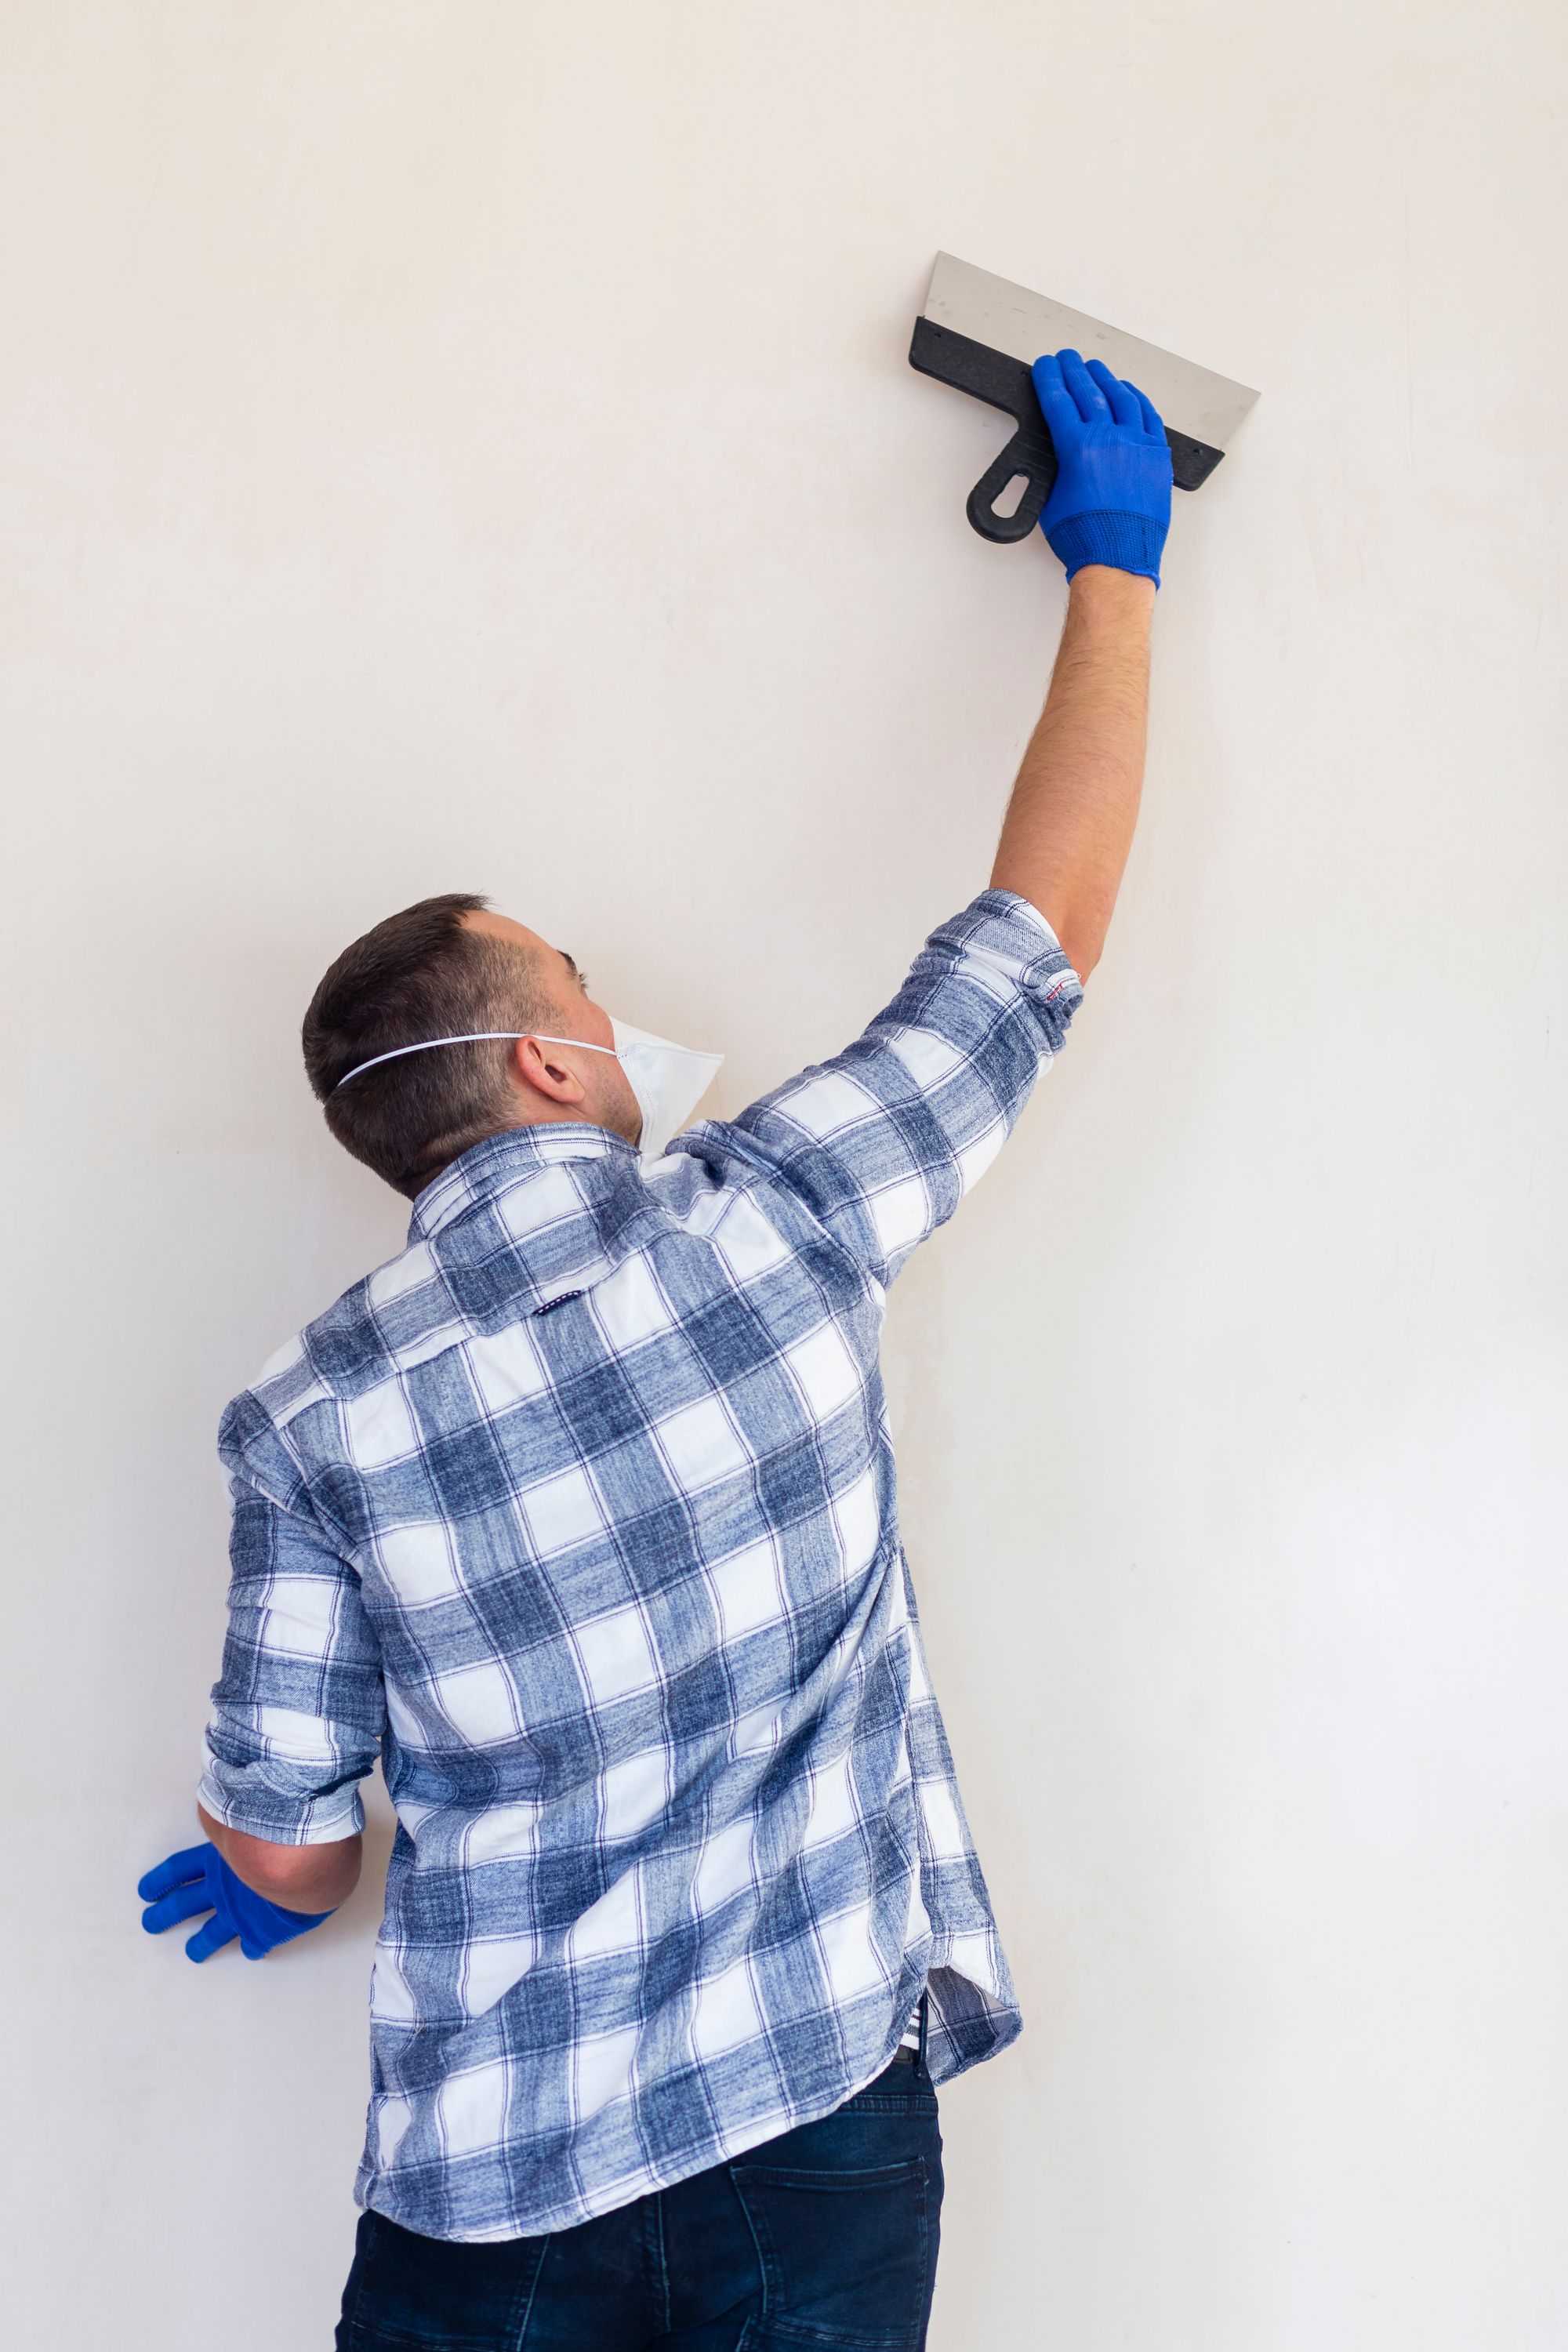 Step-by-Step Guide to Starting a Painting Contractor Career